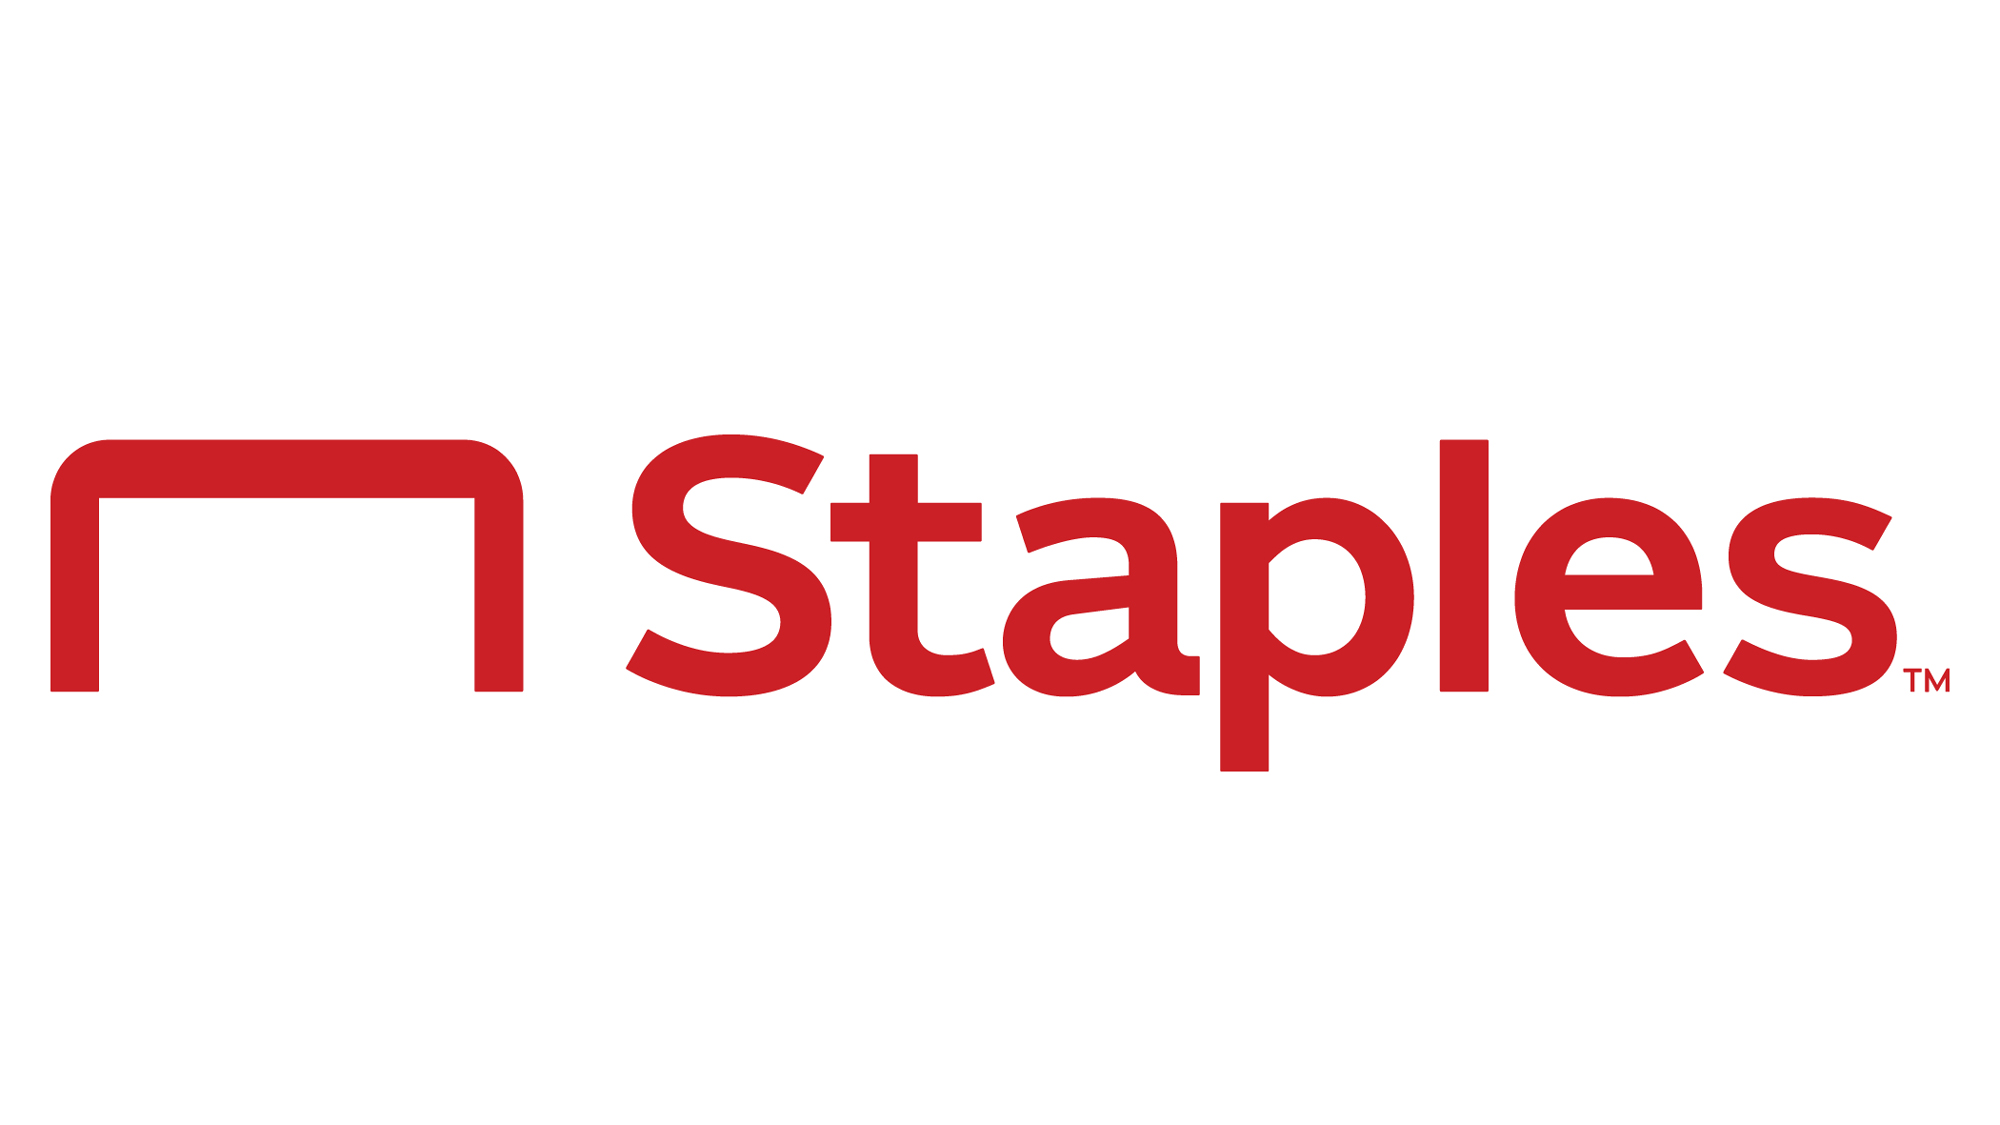 Free pack of crayons with any purchase at Staples - $0